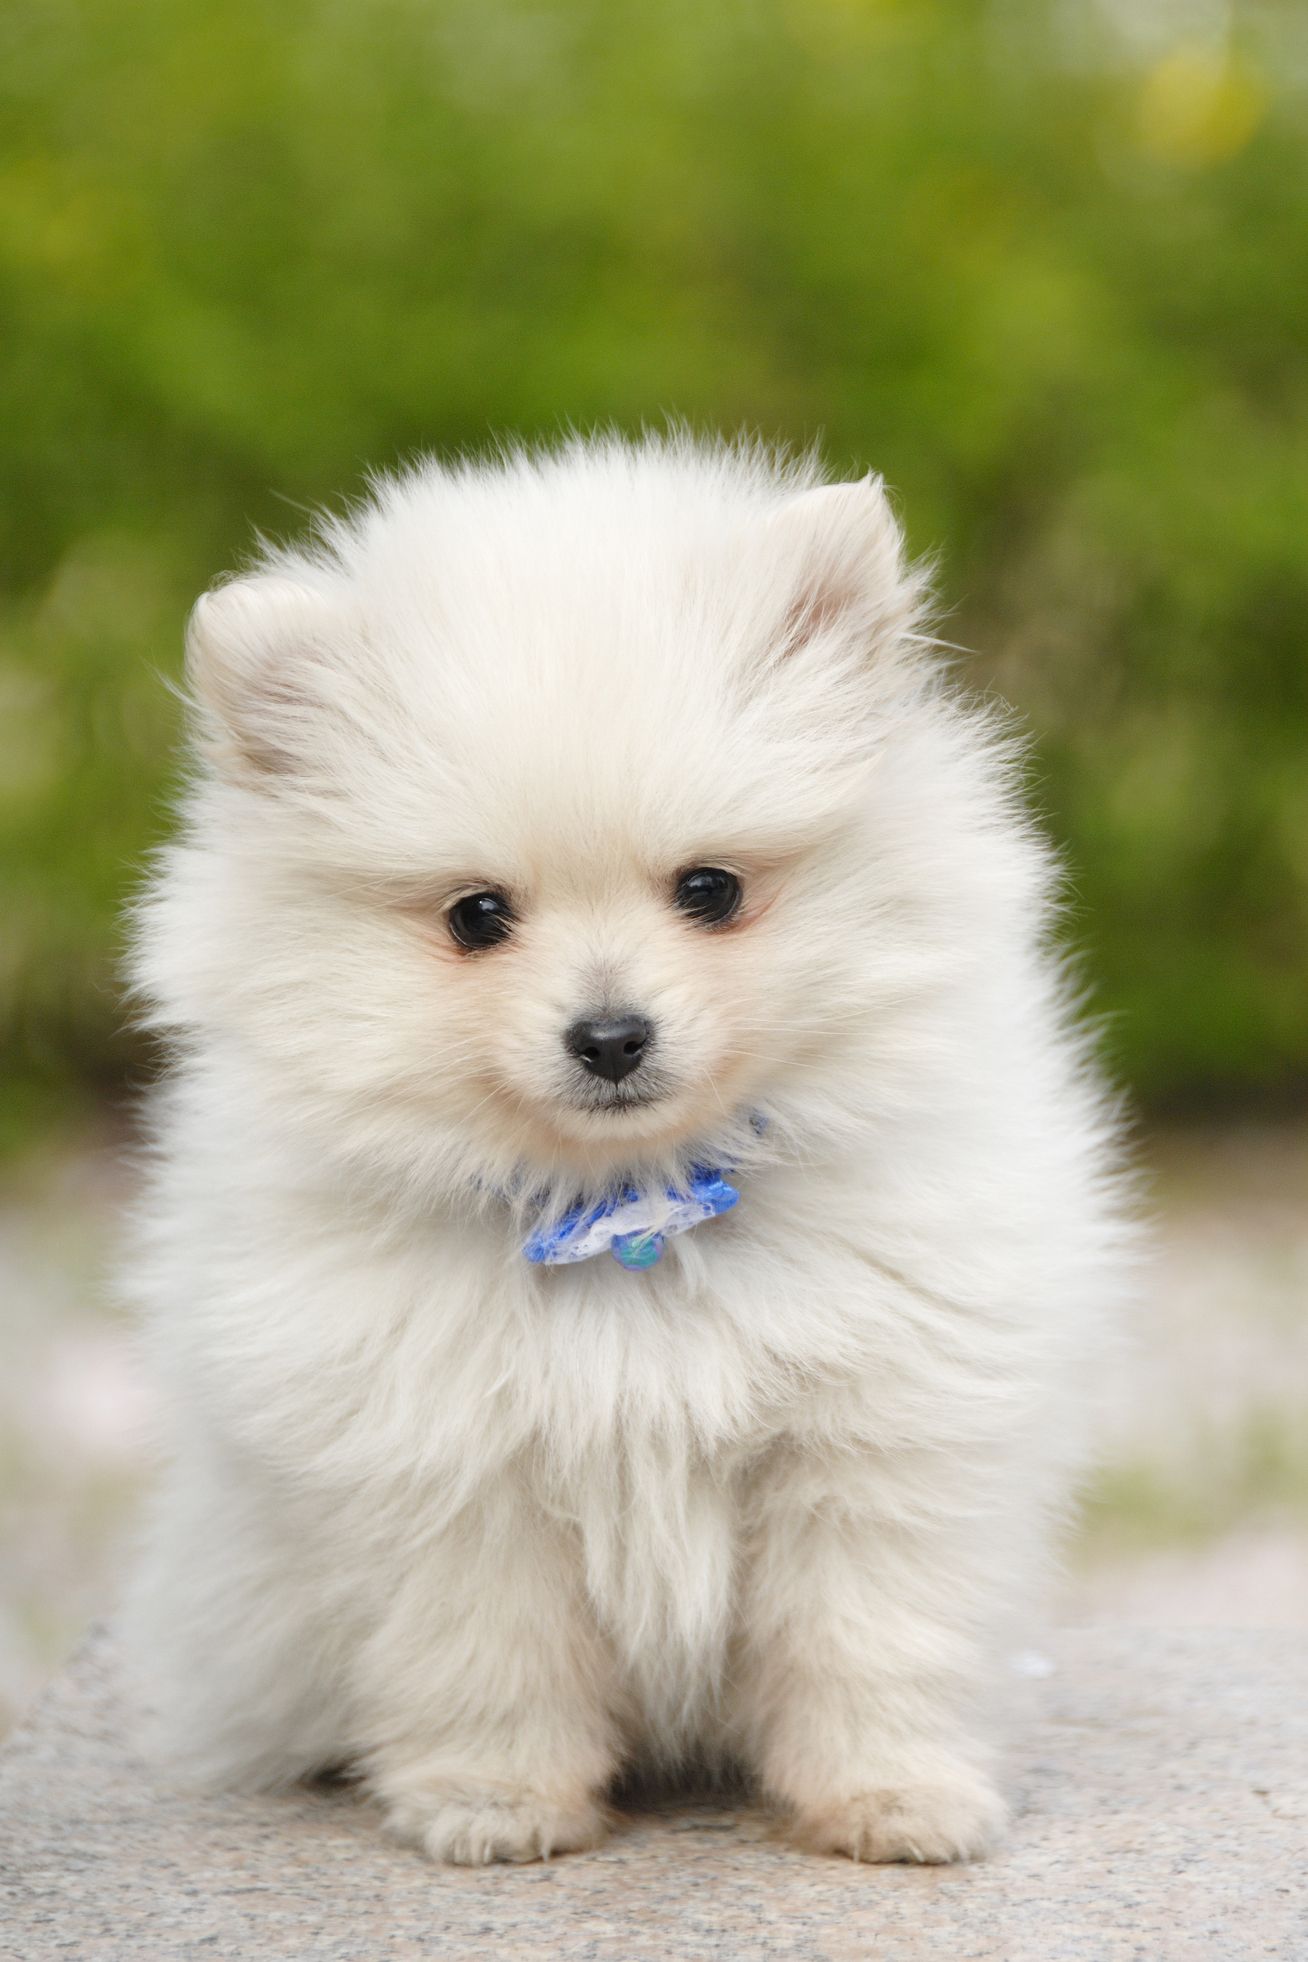 Cutest Fluffy Cute Small Dogs - Cute dog wallpapers